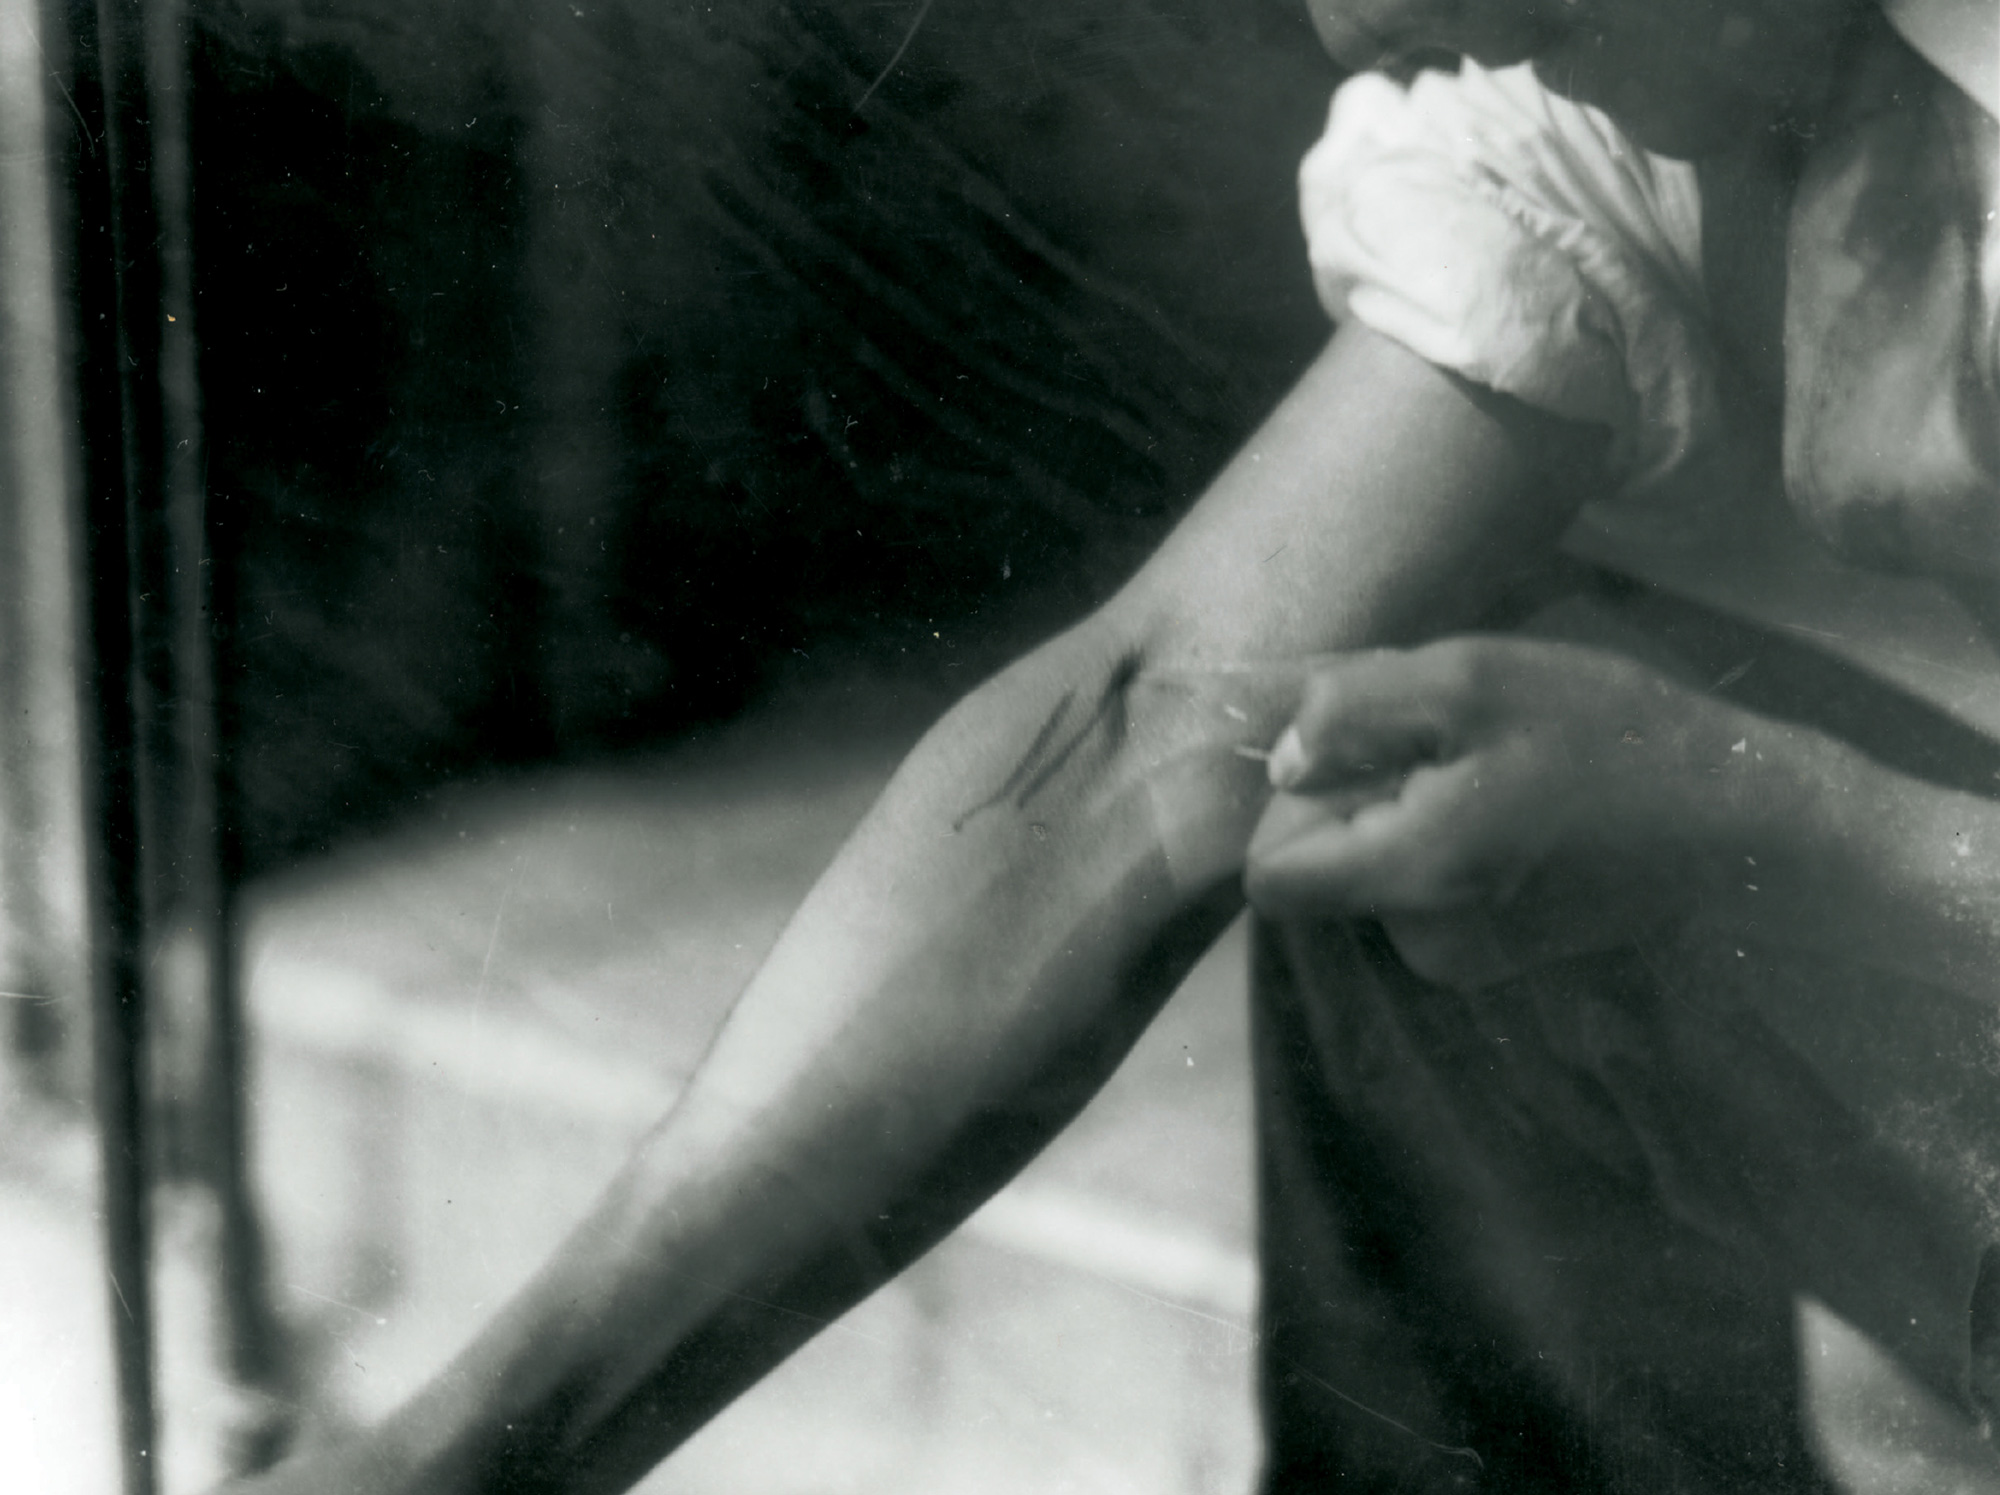 A photograph from the 1920s or 1930s depicting a man injecting drugs into his arm.